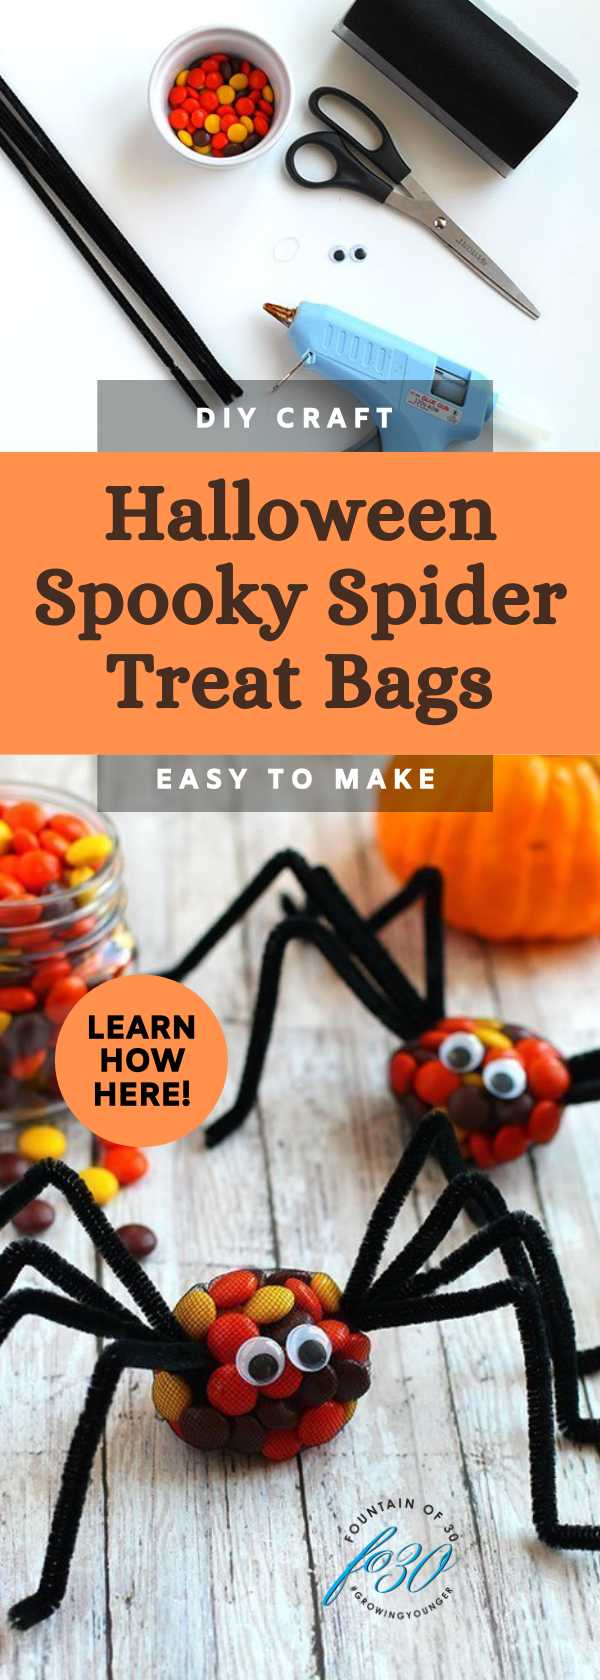 spooky spider halloween treats with reese's pieces fountainof30